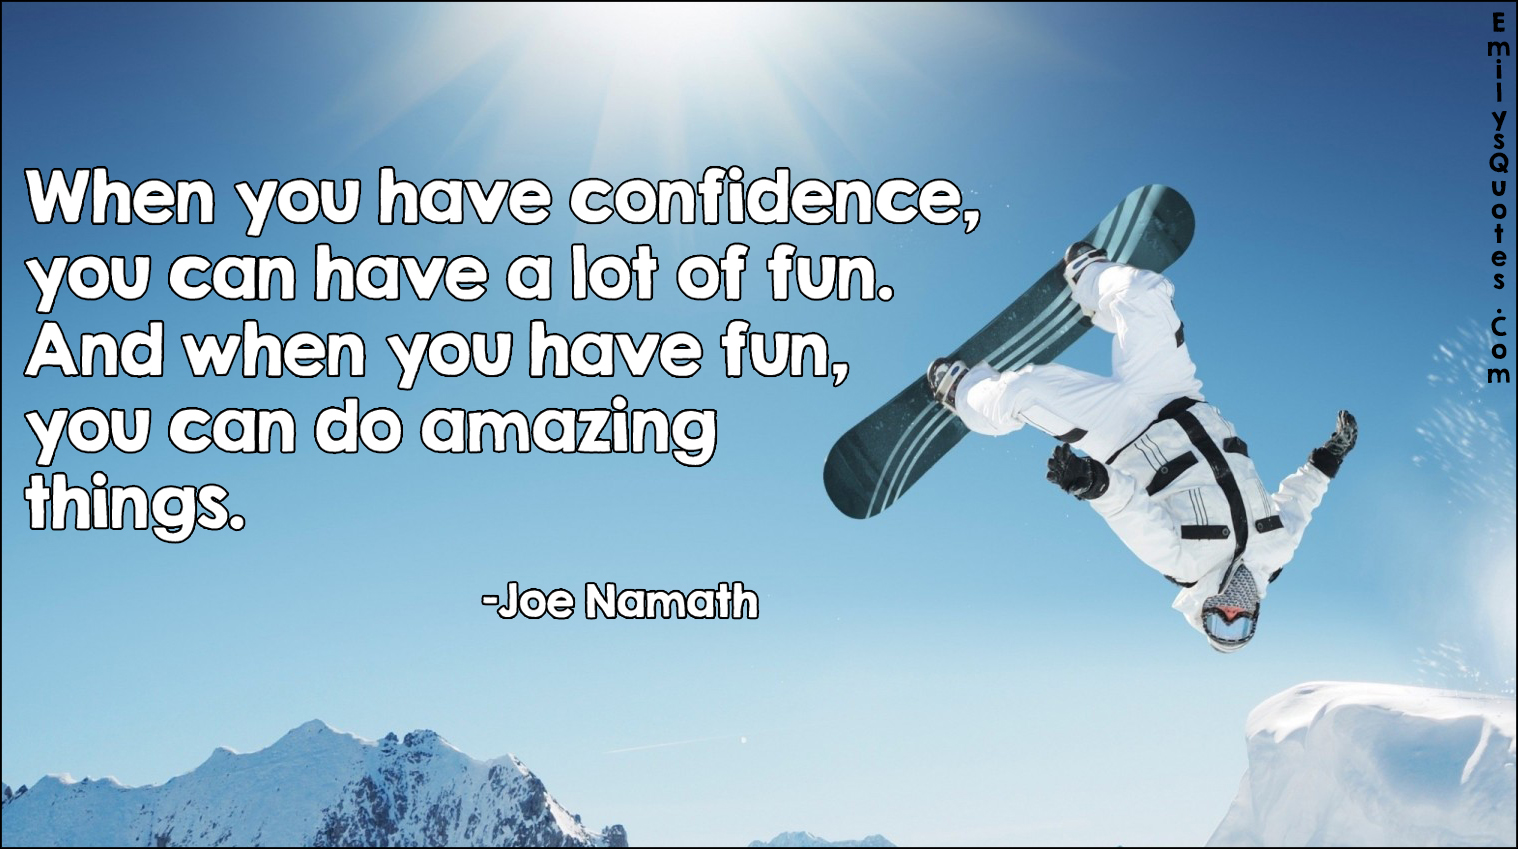 When you have confidence, you can have a lot of fun. And when you have